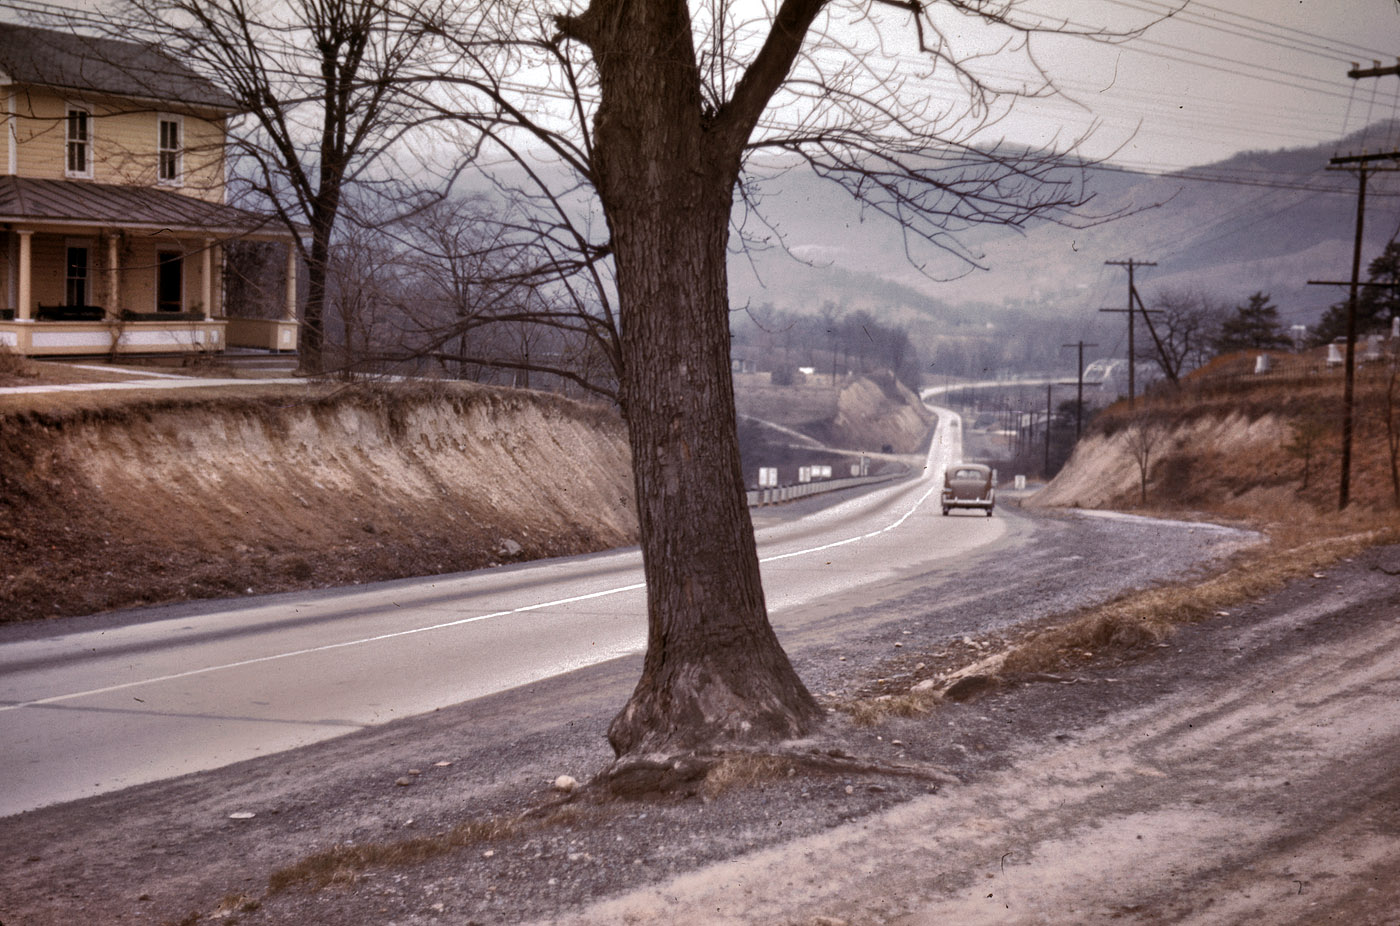 1942. "Road out of Romney, West Virginia." 35mm color transparency by John Vachon for the Office of War Information. View full size.